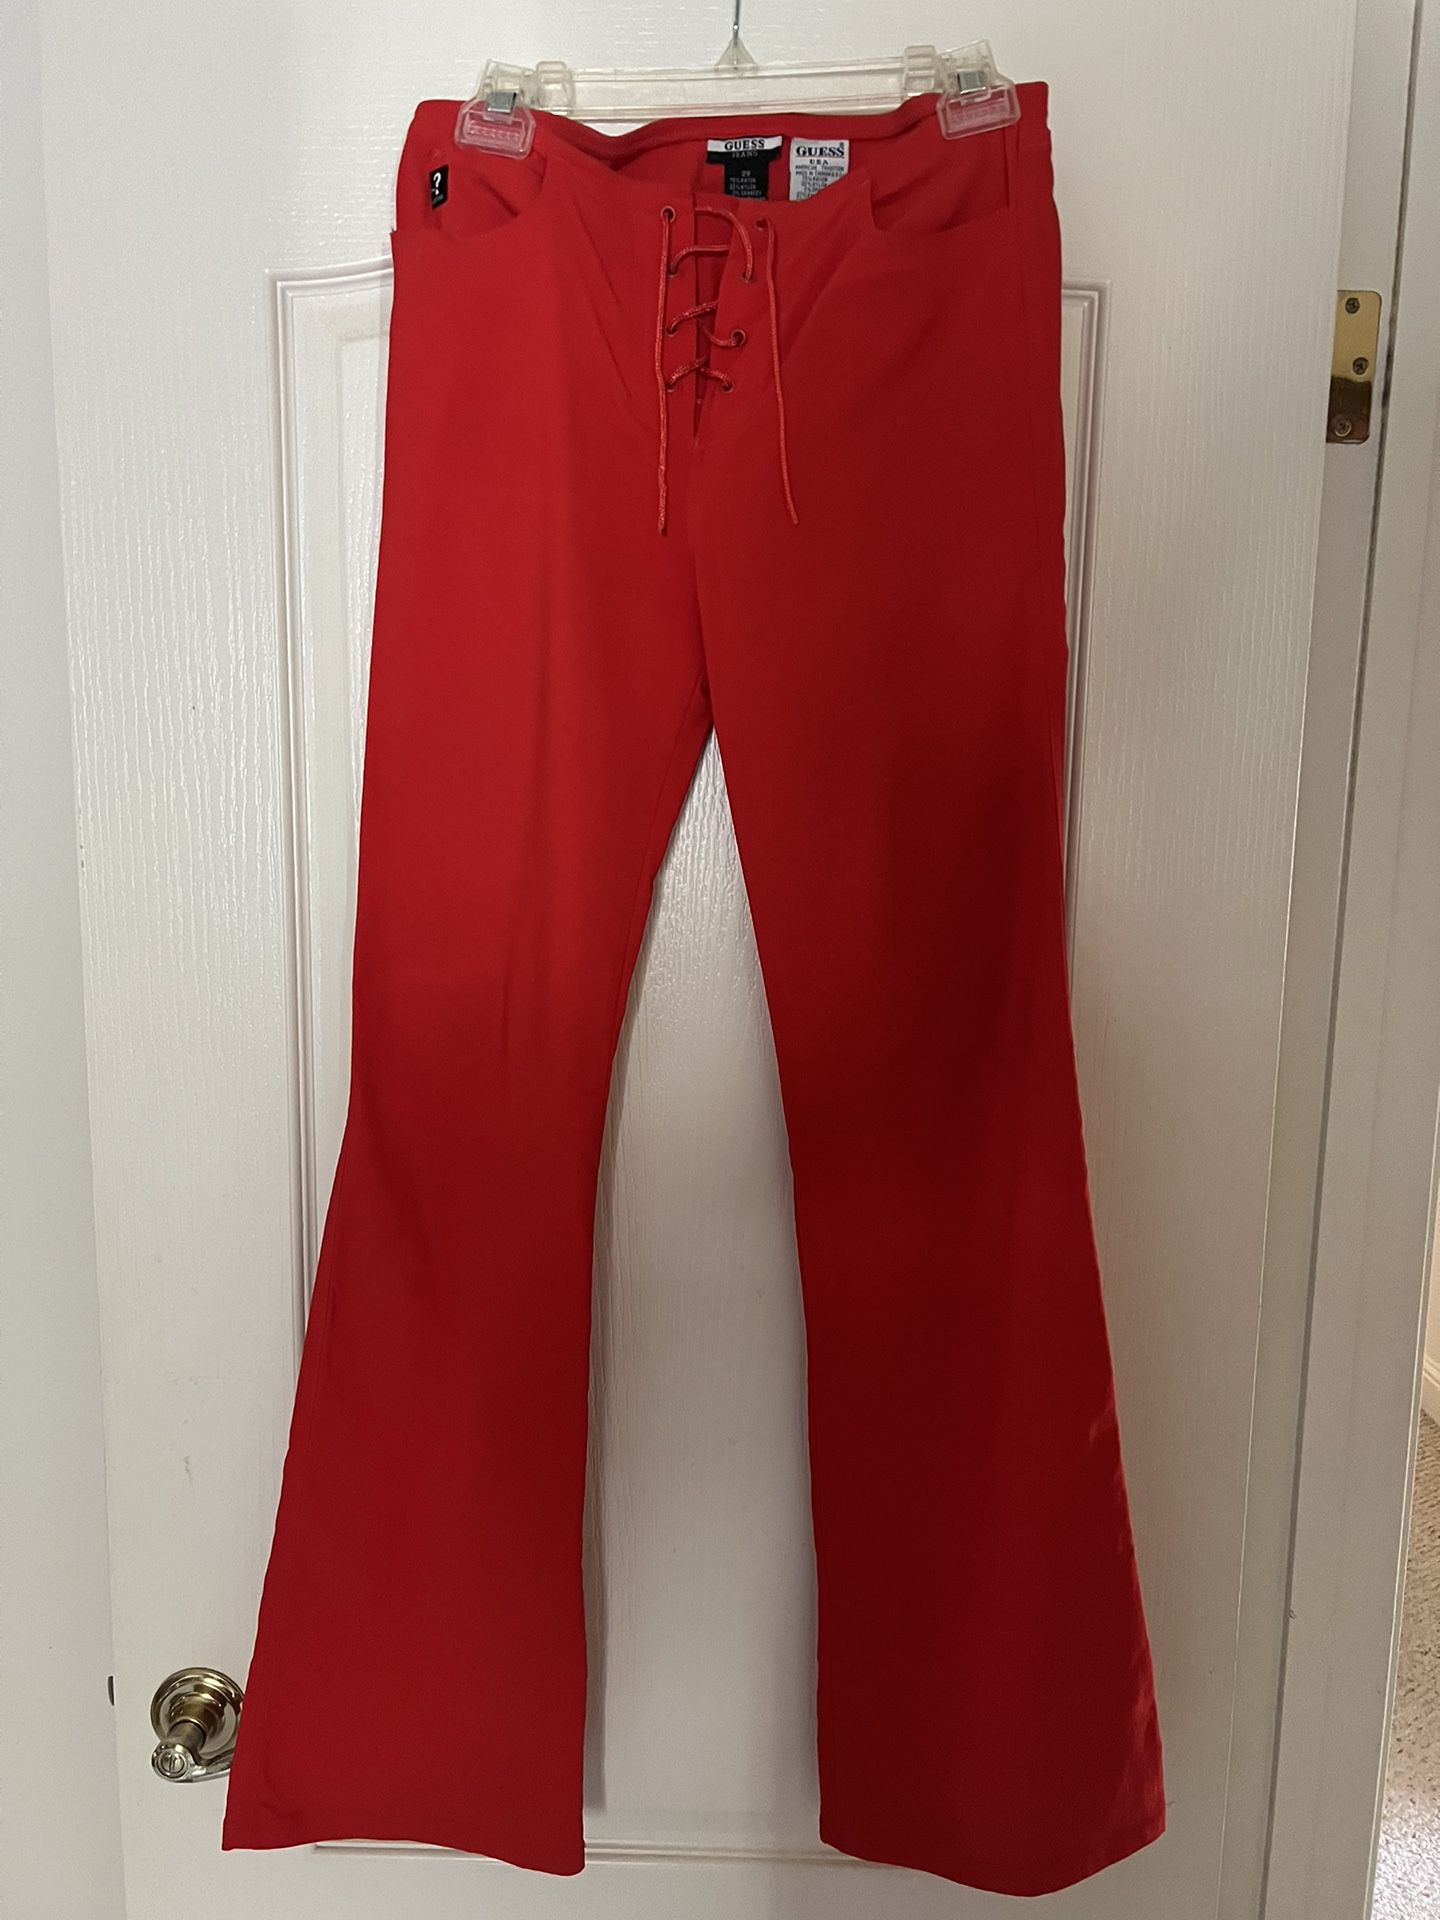 Vintage Guess Lace Up Red Pants